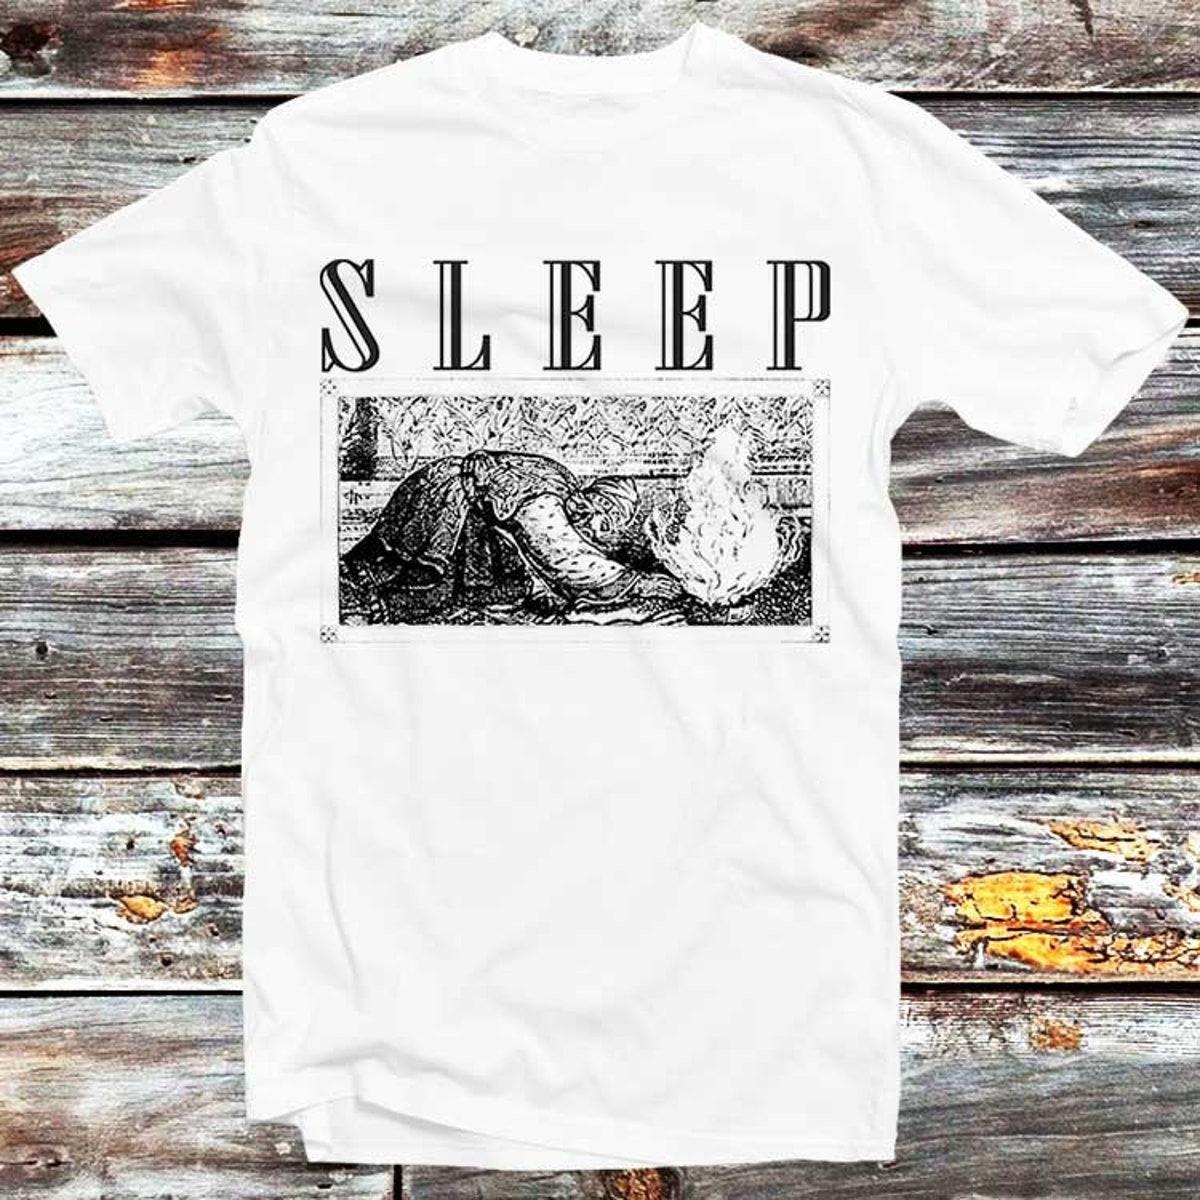 Sleep Band Vintage T-shirt Gift For Fans